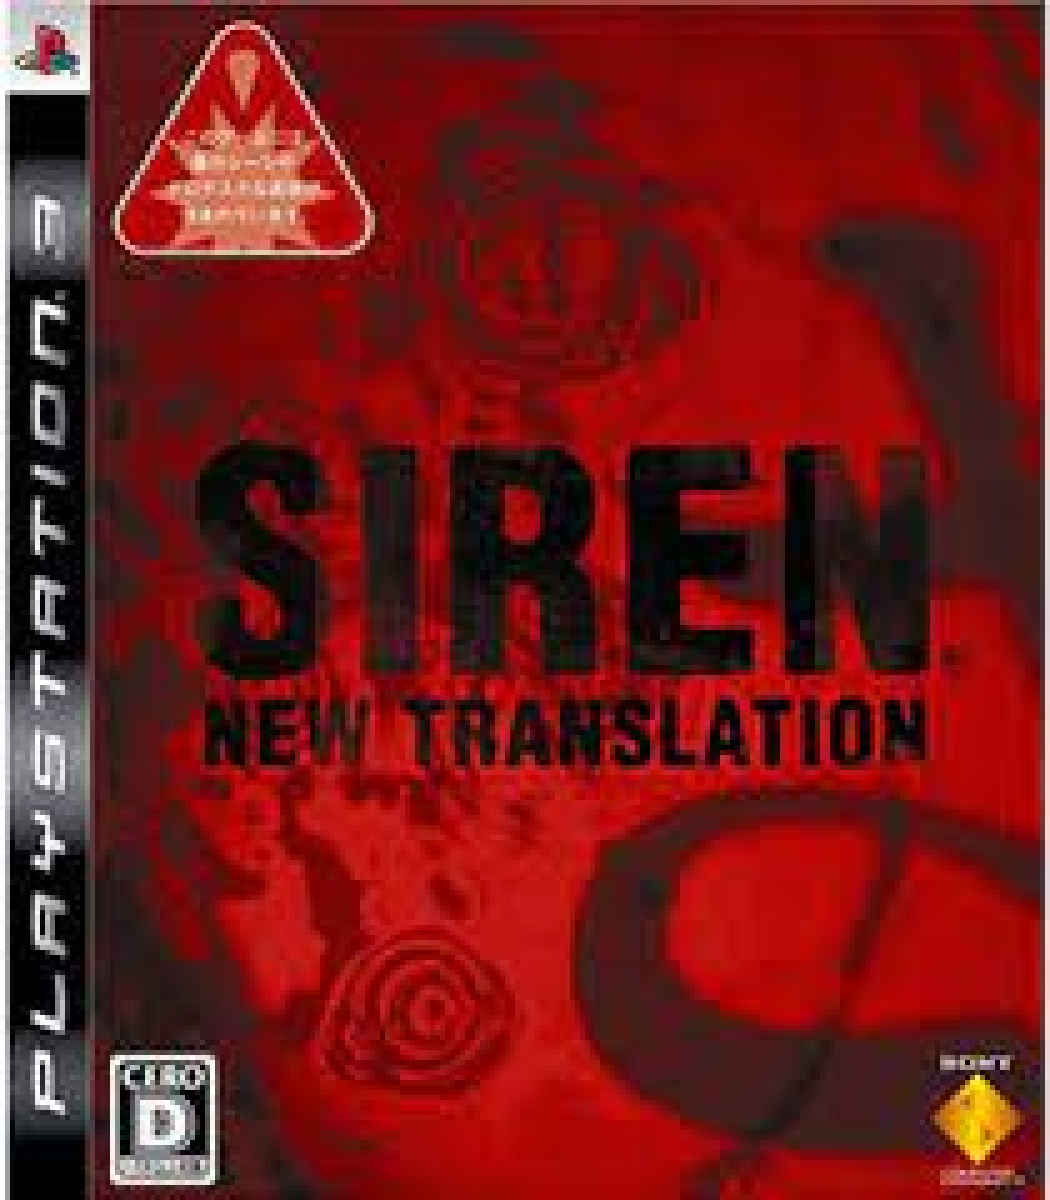 Siren New Translation PS3 | Buy or Rent CD at Best Price